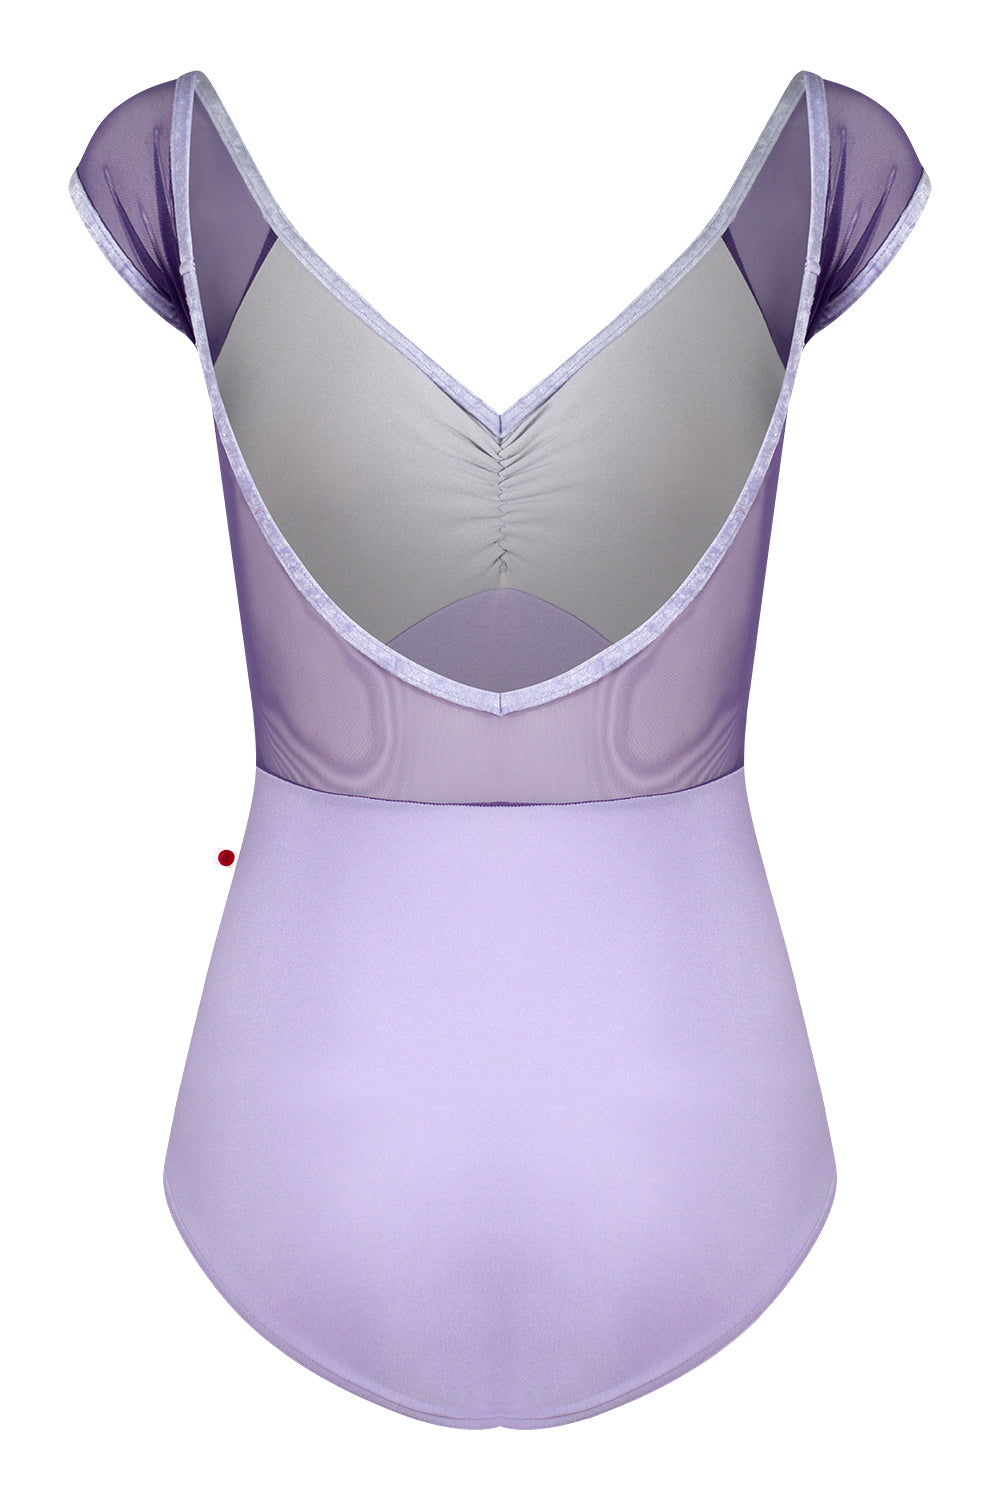 Elli leotard with N-Poem body color, N-Silver top color, Mesh Fortune back & cap sleeve color and CV-Angelic trim color